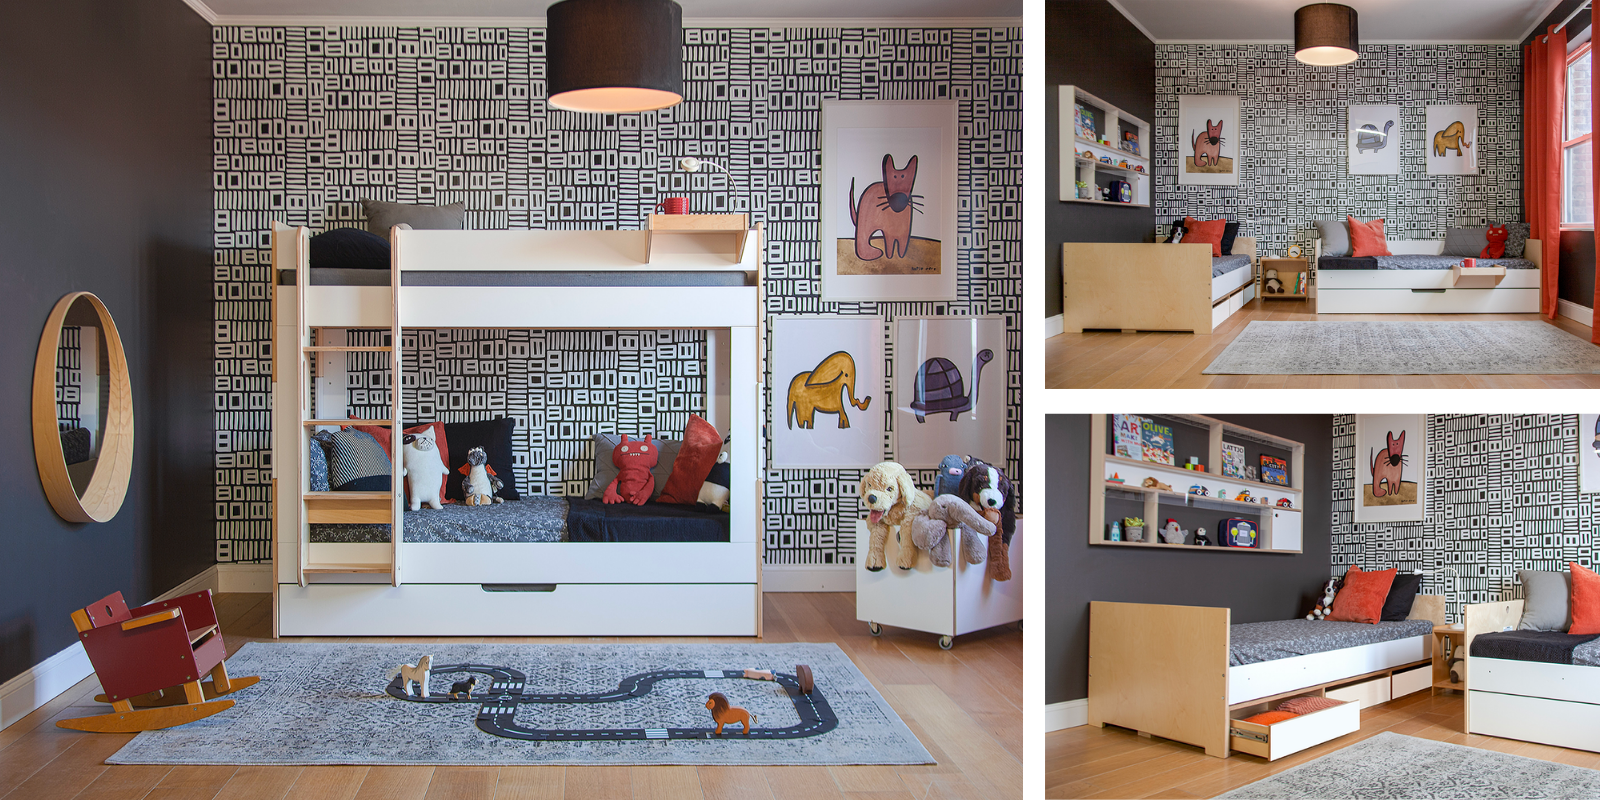 Triple panel image of a stylish child's room with a murphy bed, playful decor, and modern furniture.